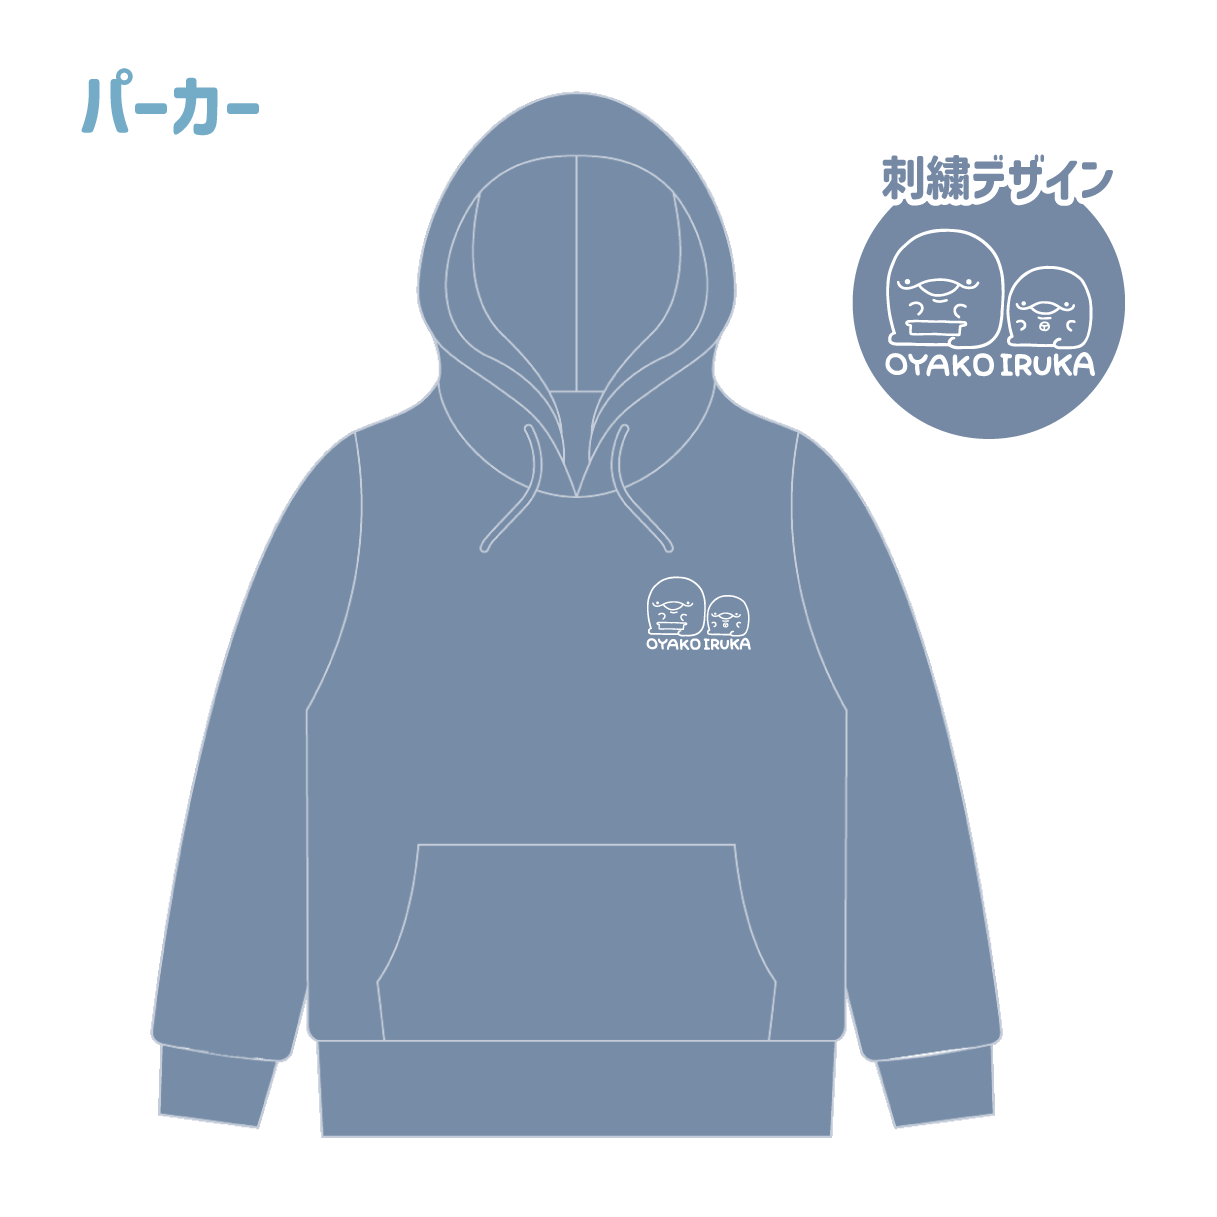 [Parent and child dolphin] Embroidered hoodie [shipped in mid-February]